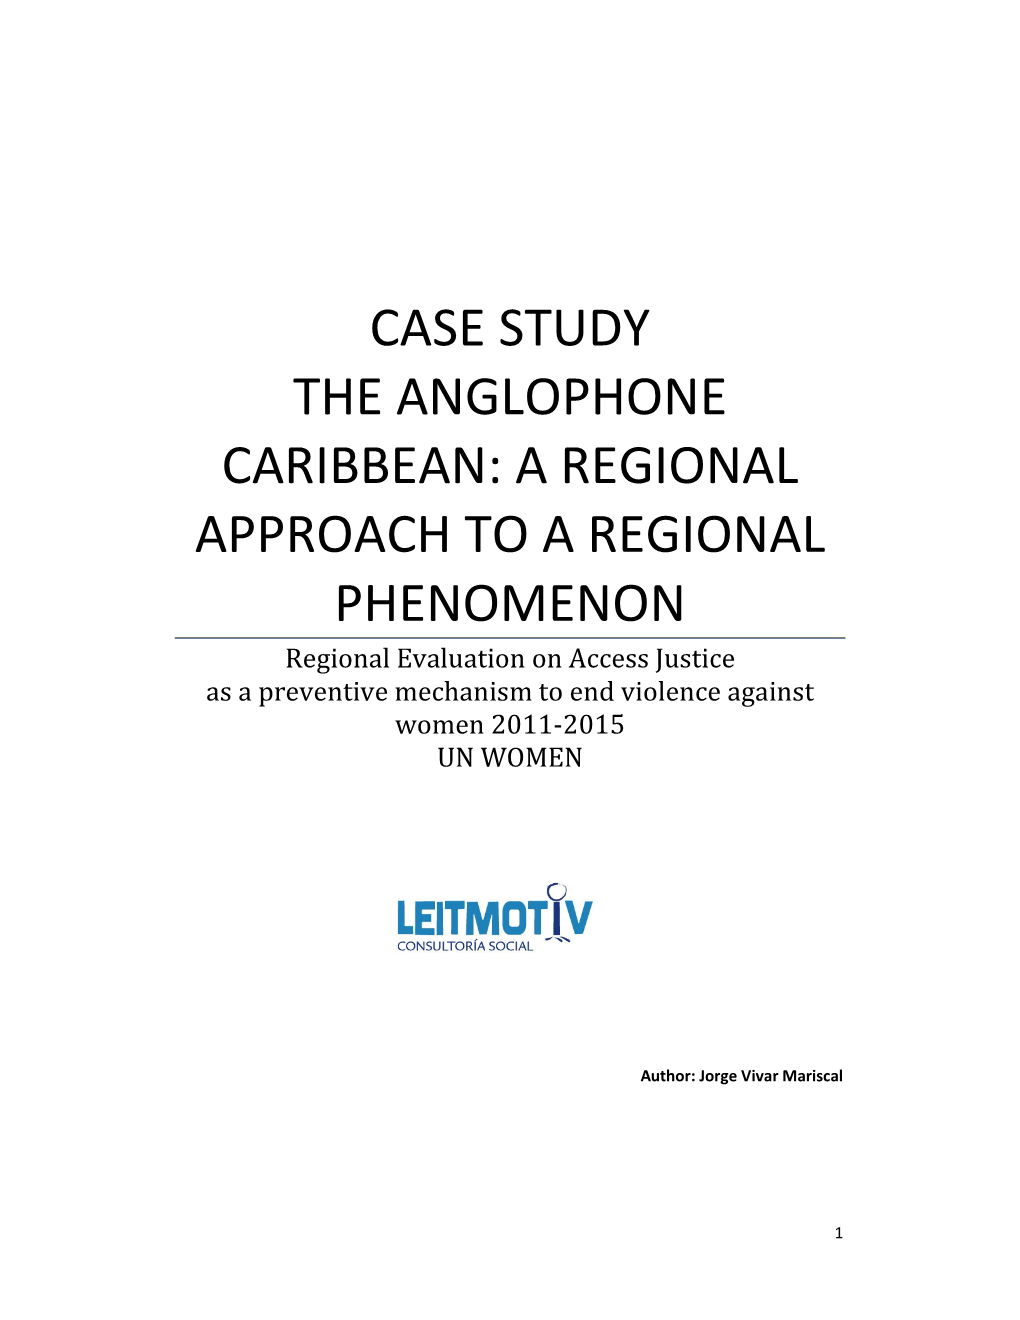 Case Study the Anglophone Caribbean: a Regional Approach to A